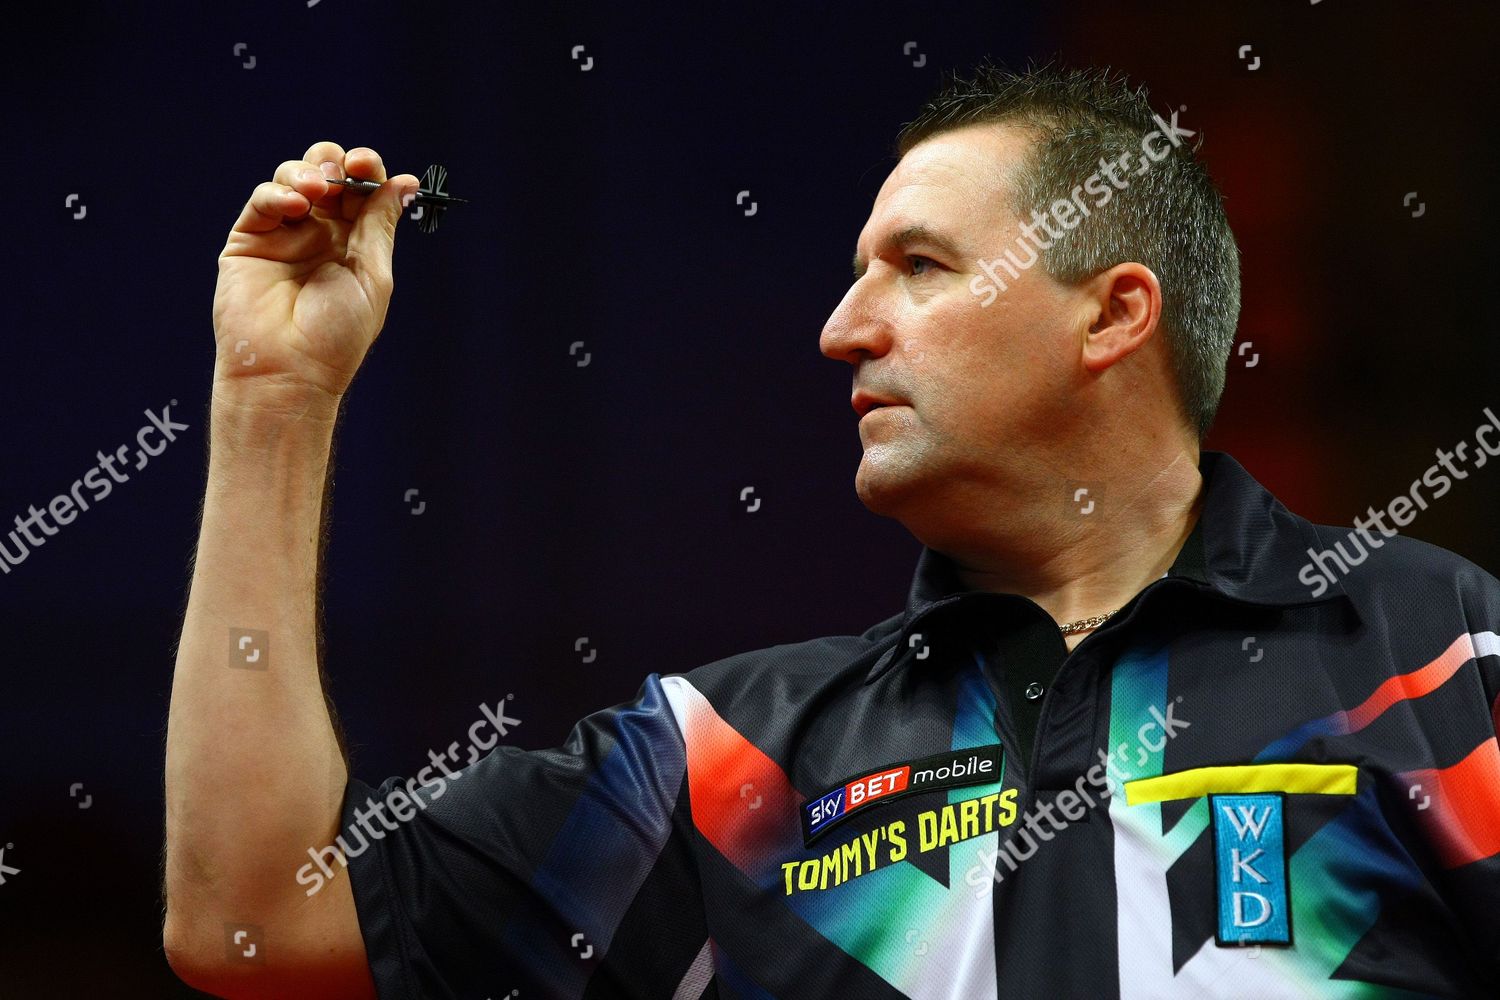 Darts Pdc World Matchplay Ronnie Baxter Editorial Stock Photo Stock Image | Shutterstock